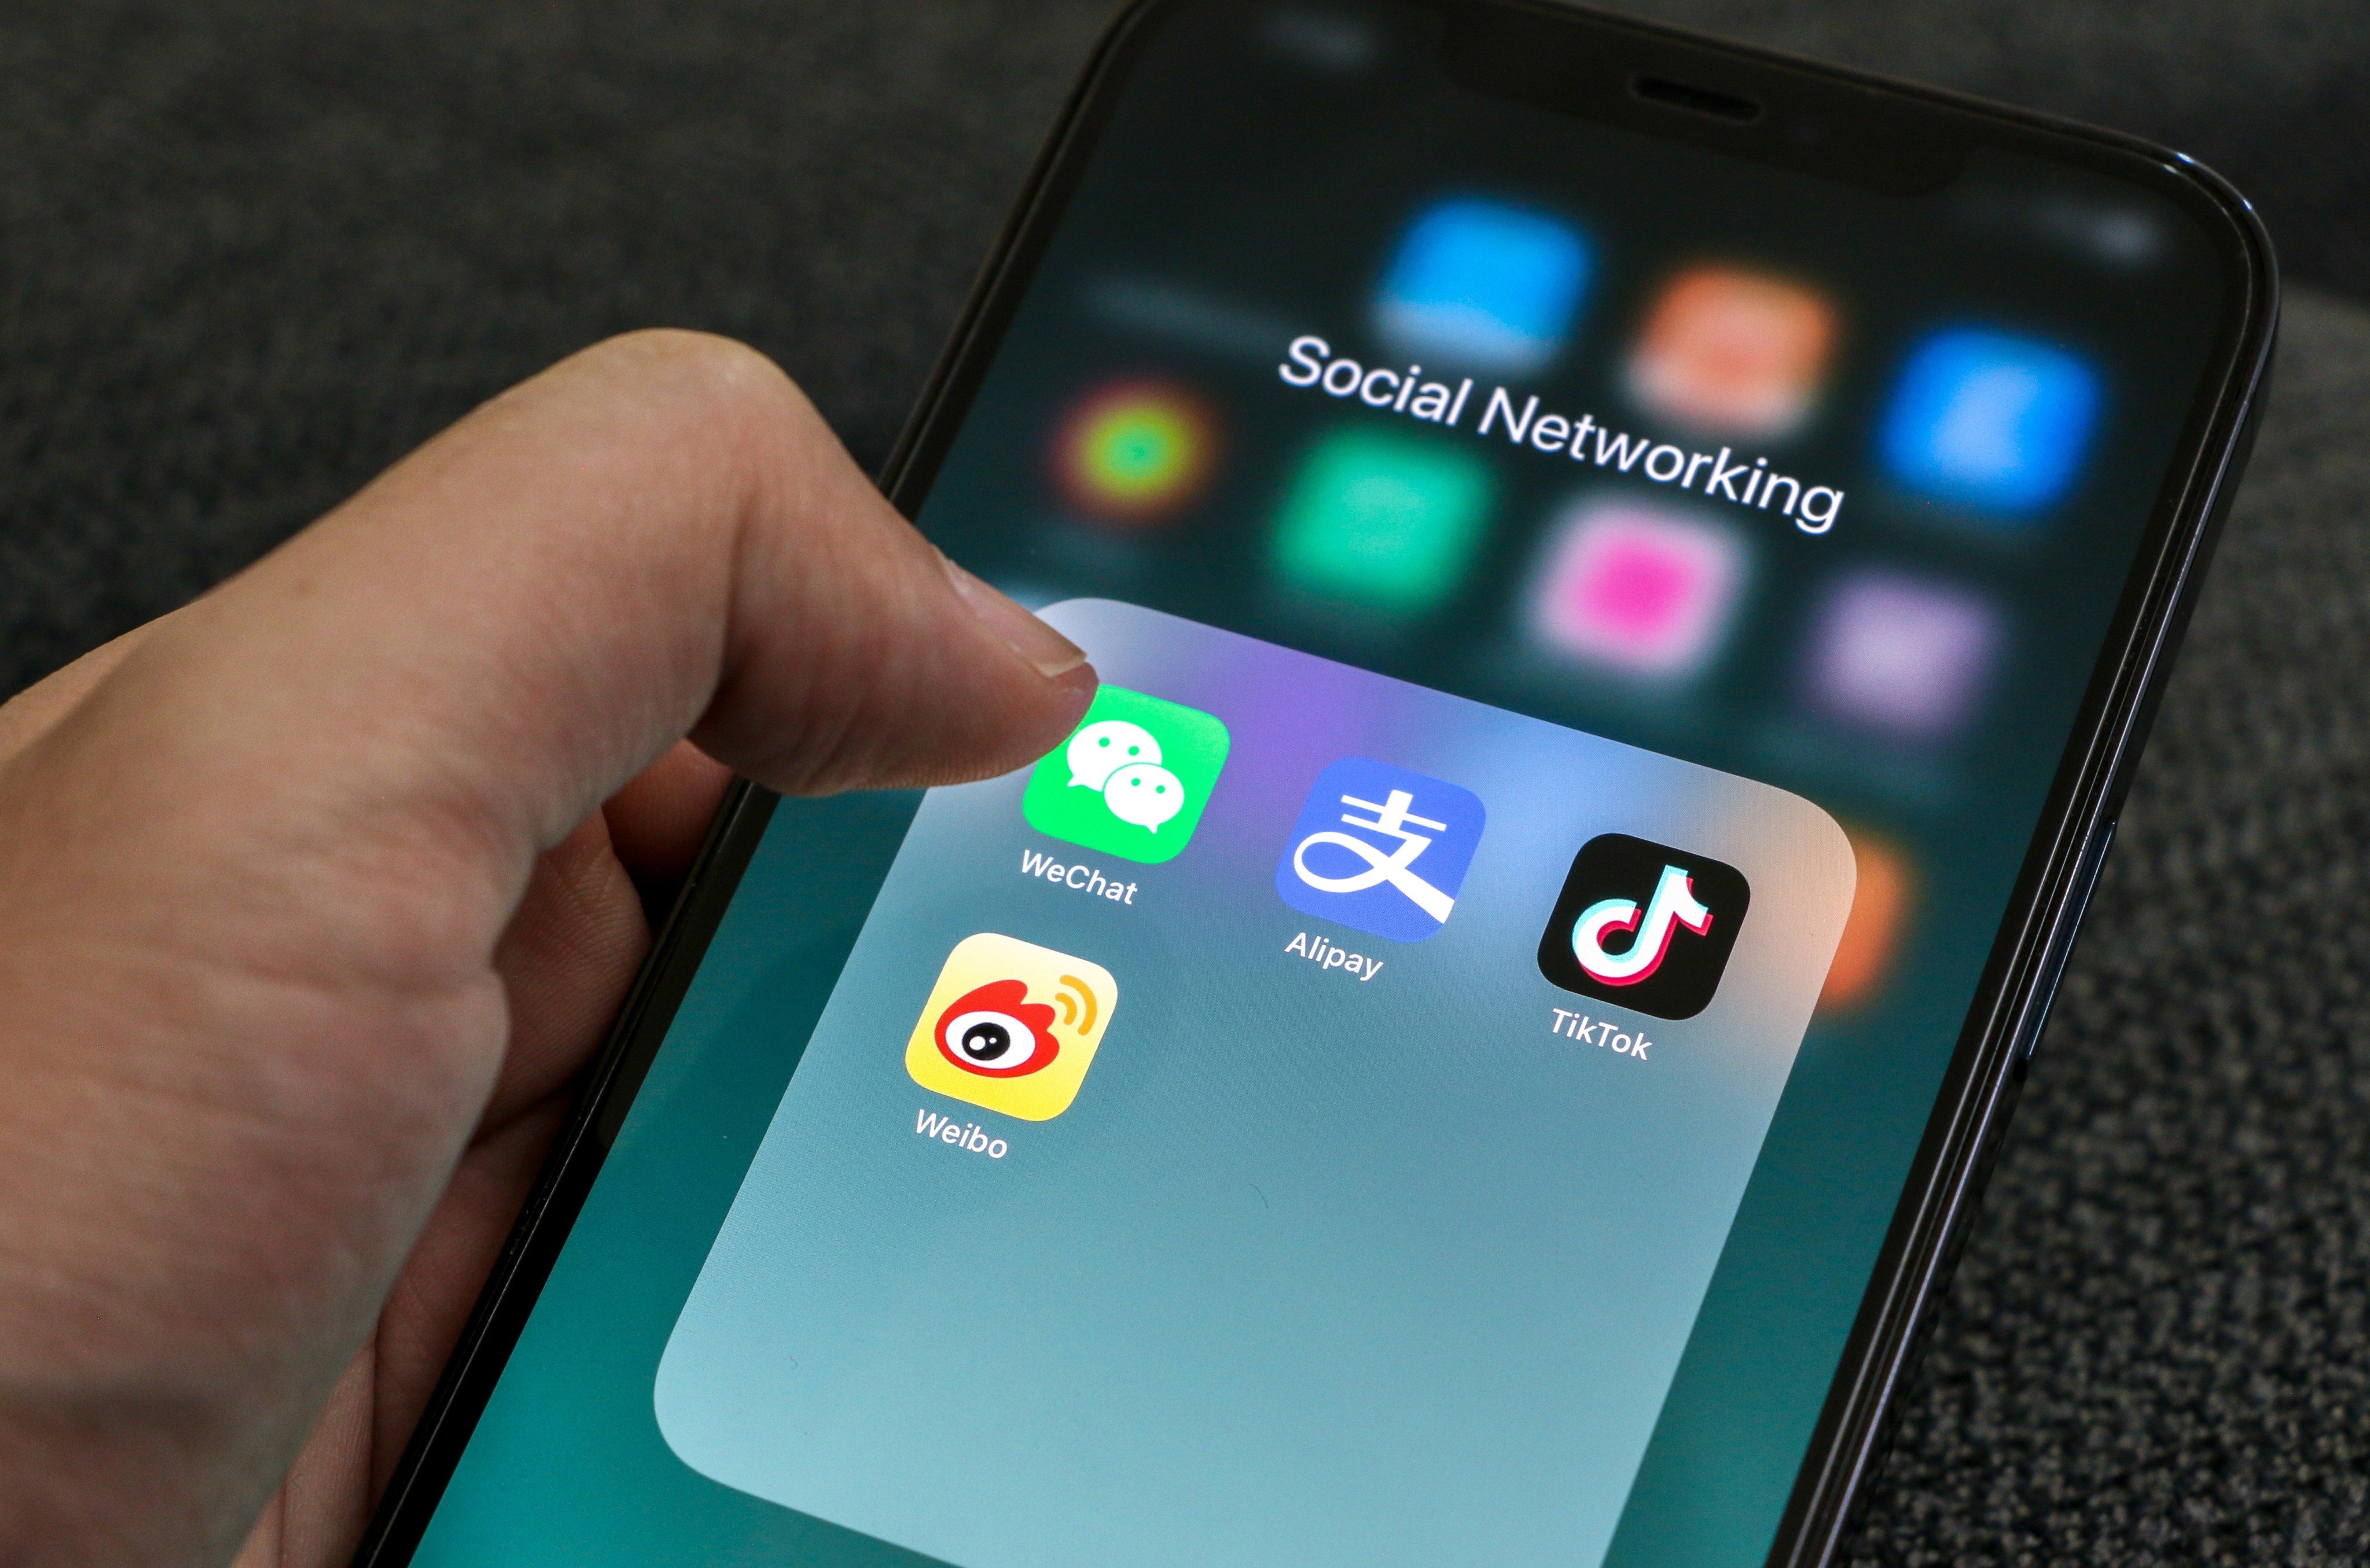 The total number of apps in China has declined over the past few years, following Beijing’s regulatory crackdown on the country’s major internet firms. Photo: Shutterstock